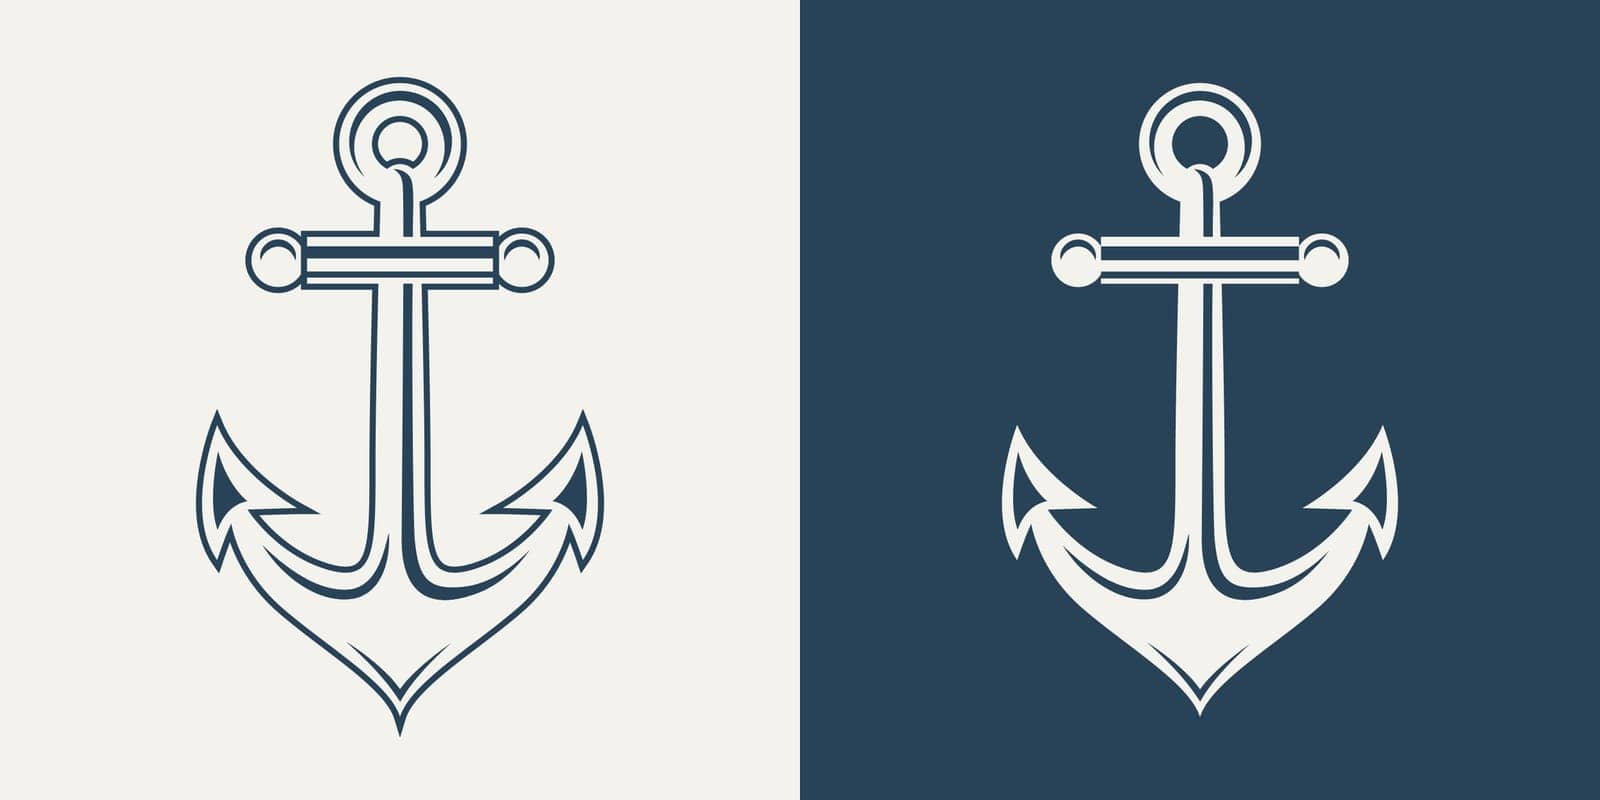 Vector Anchors. Anchor Silhouette Icon Set. Anchor with Outline. Anchor Design Template. Vector Illustration by Gomolach